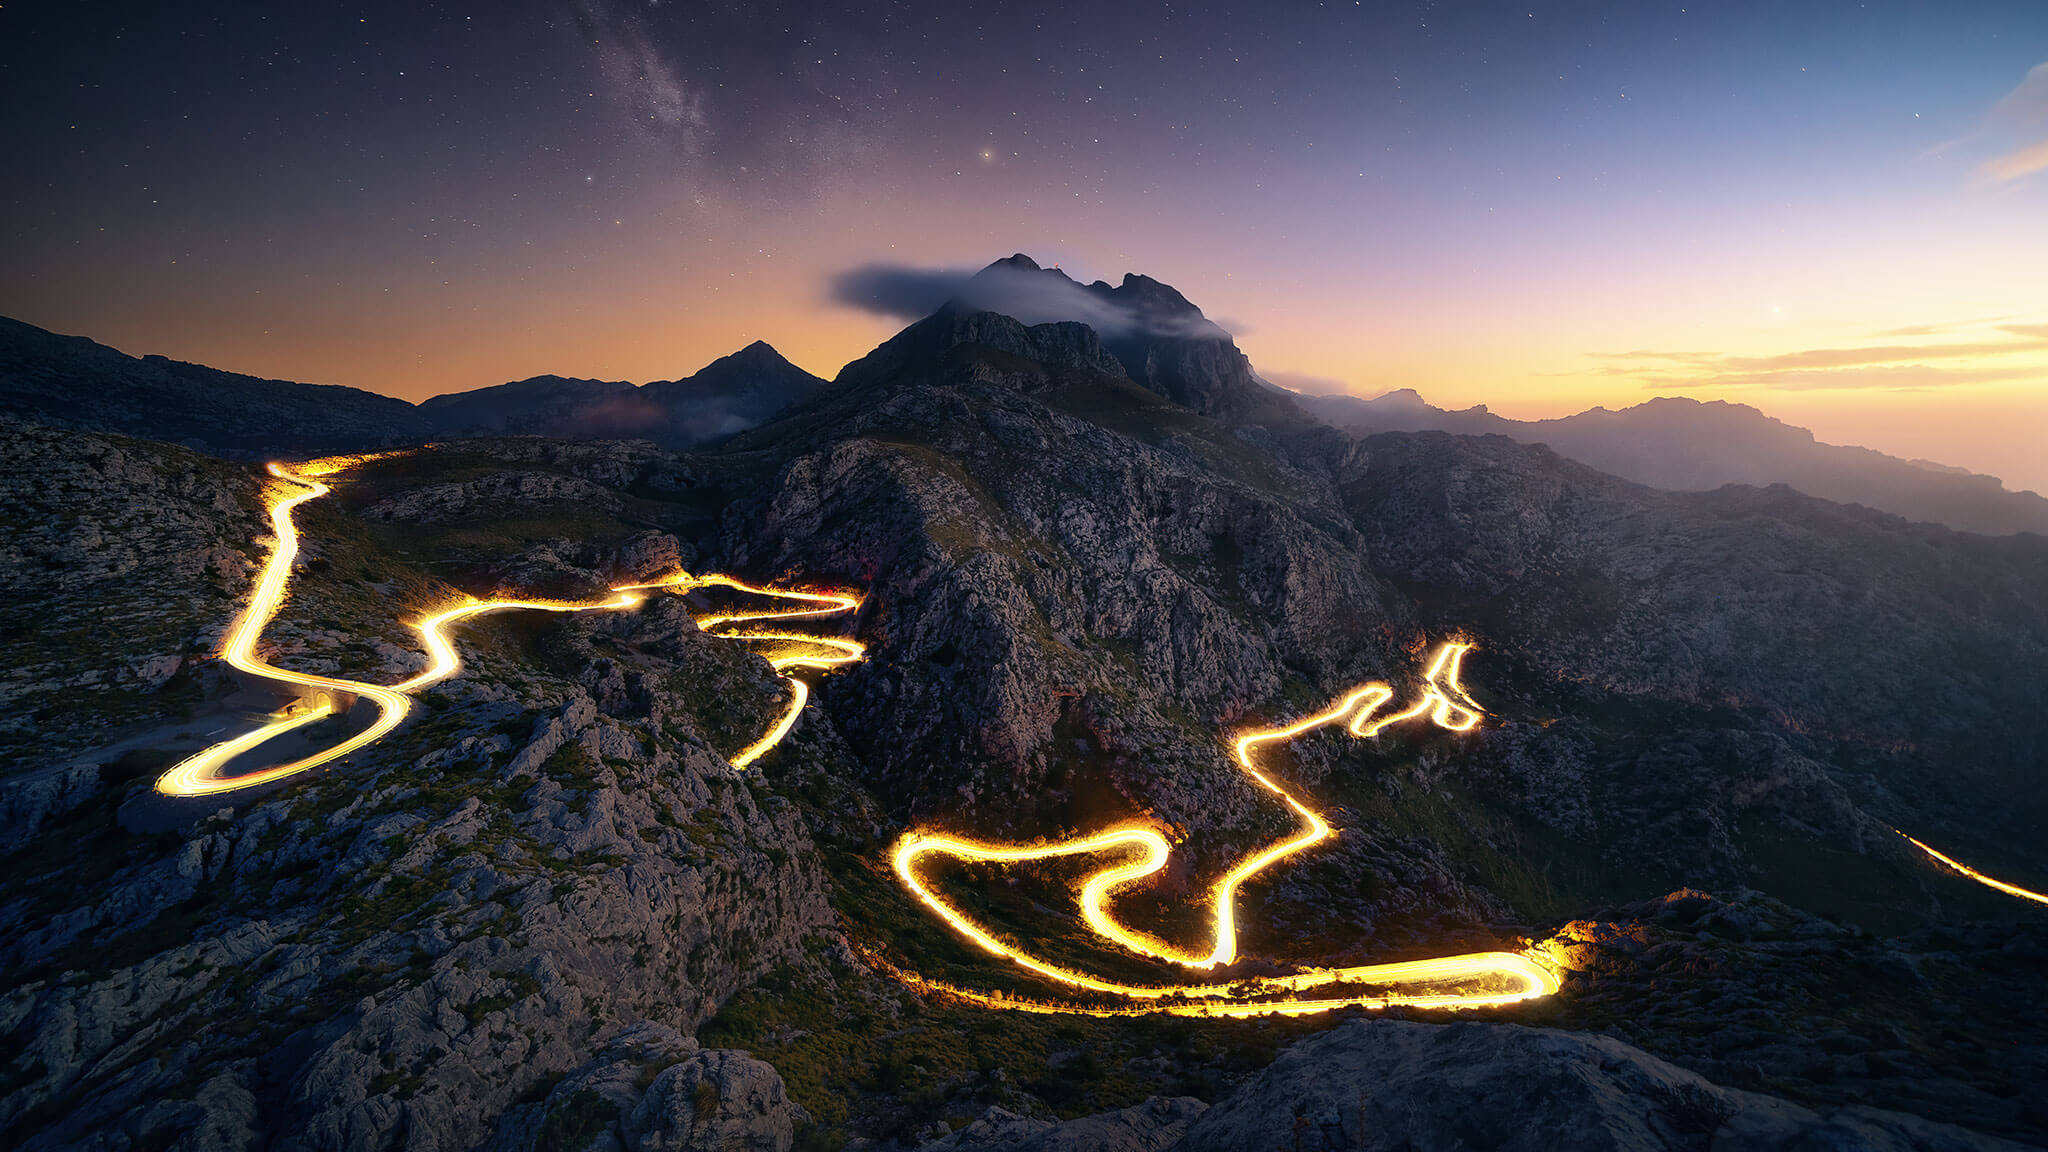 Mountain peaks at night with lava trails